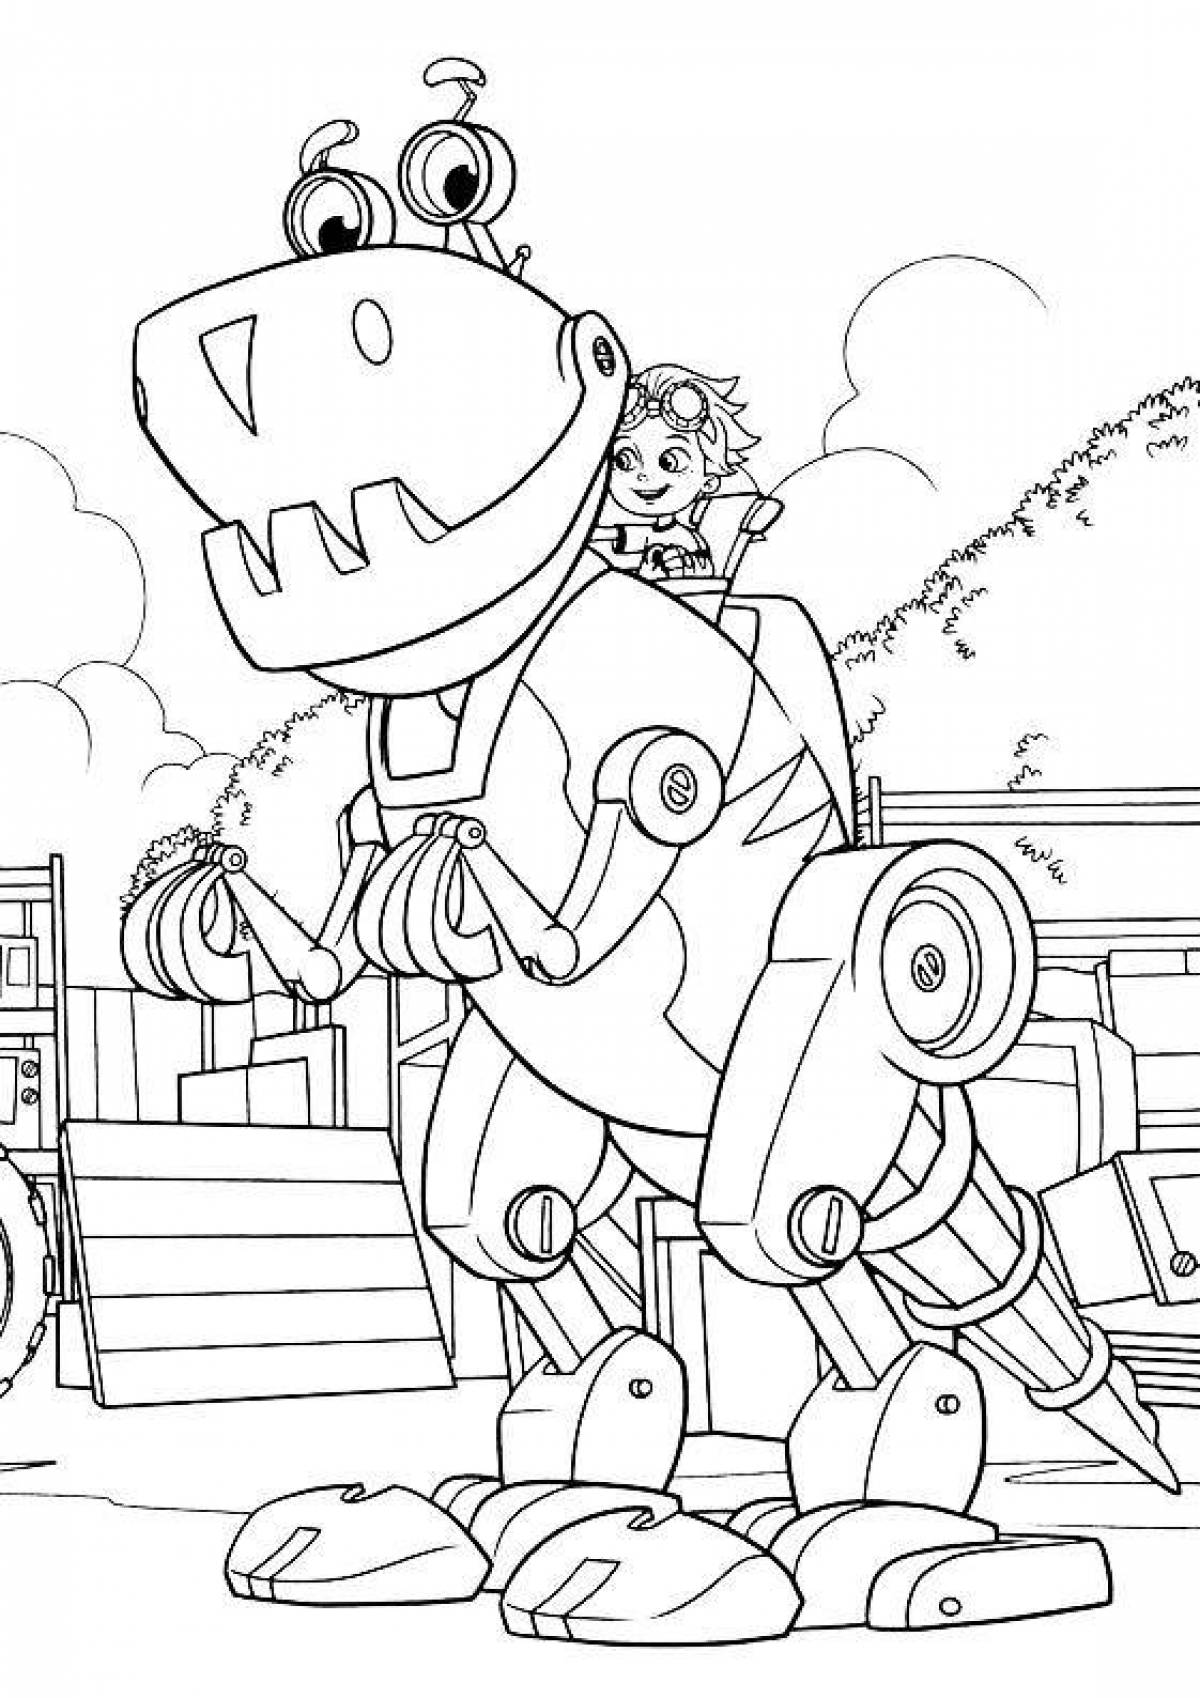 Inviting mechanic coloring book